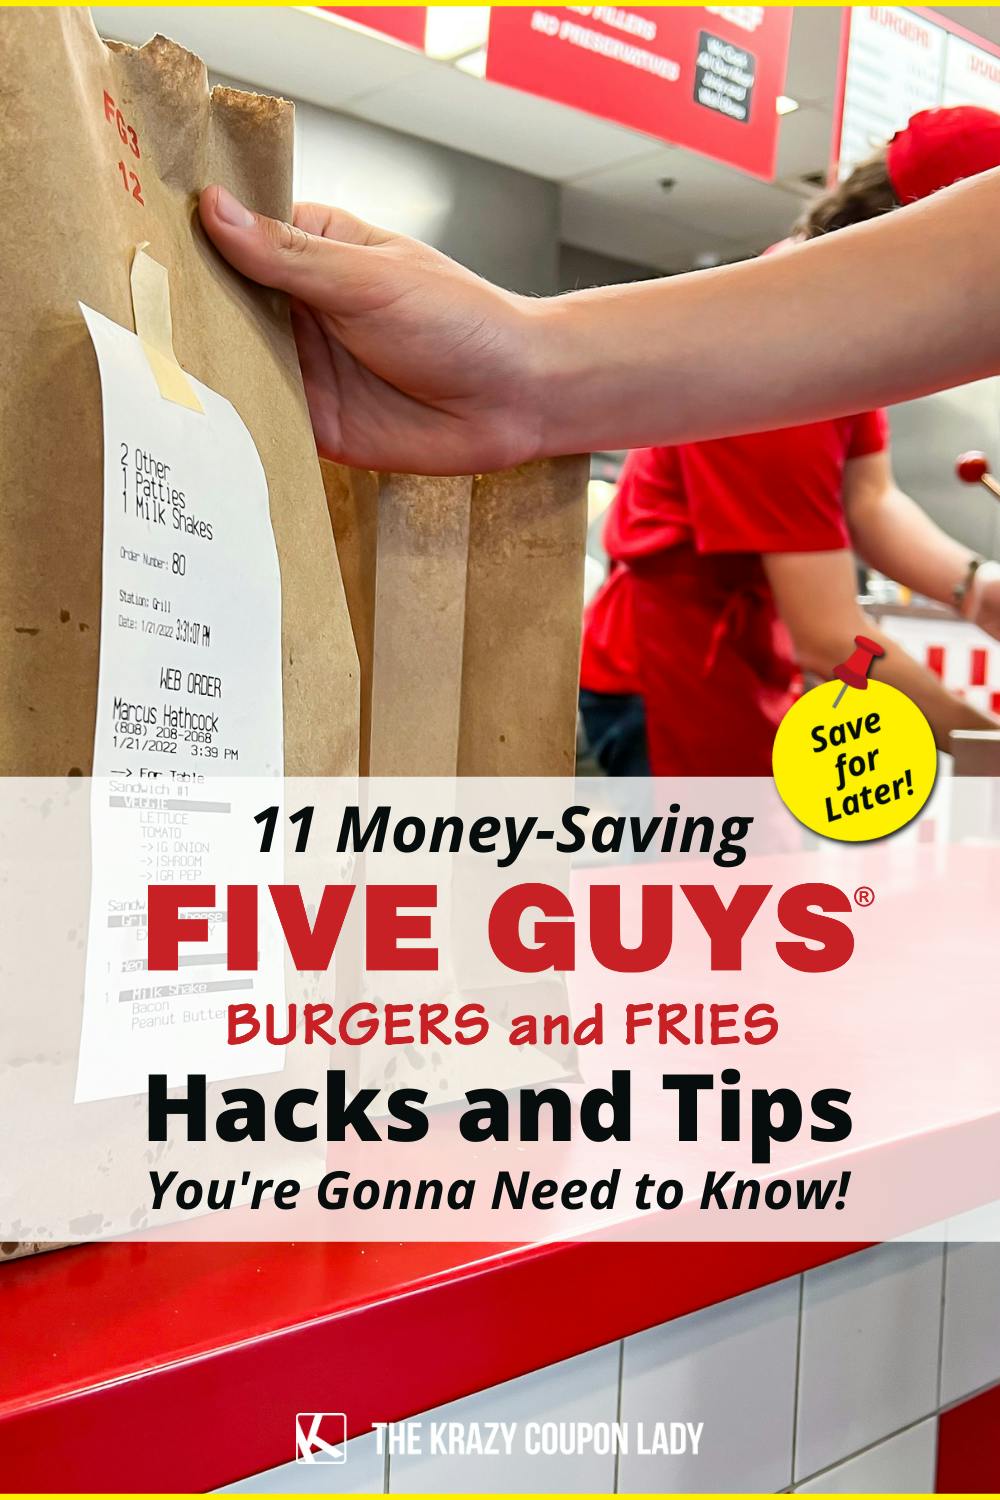 11 Tasty Tips to Get Five Guys Burgers for Cheap